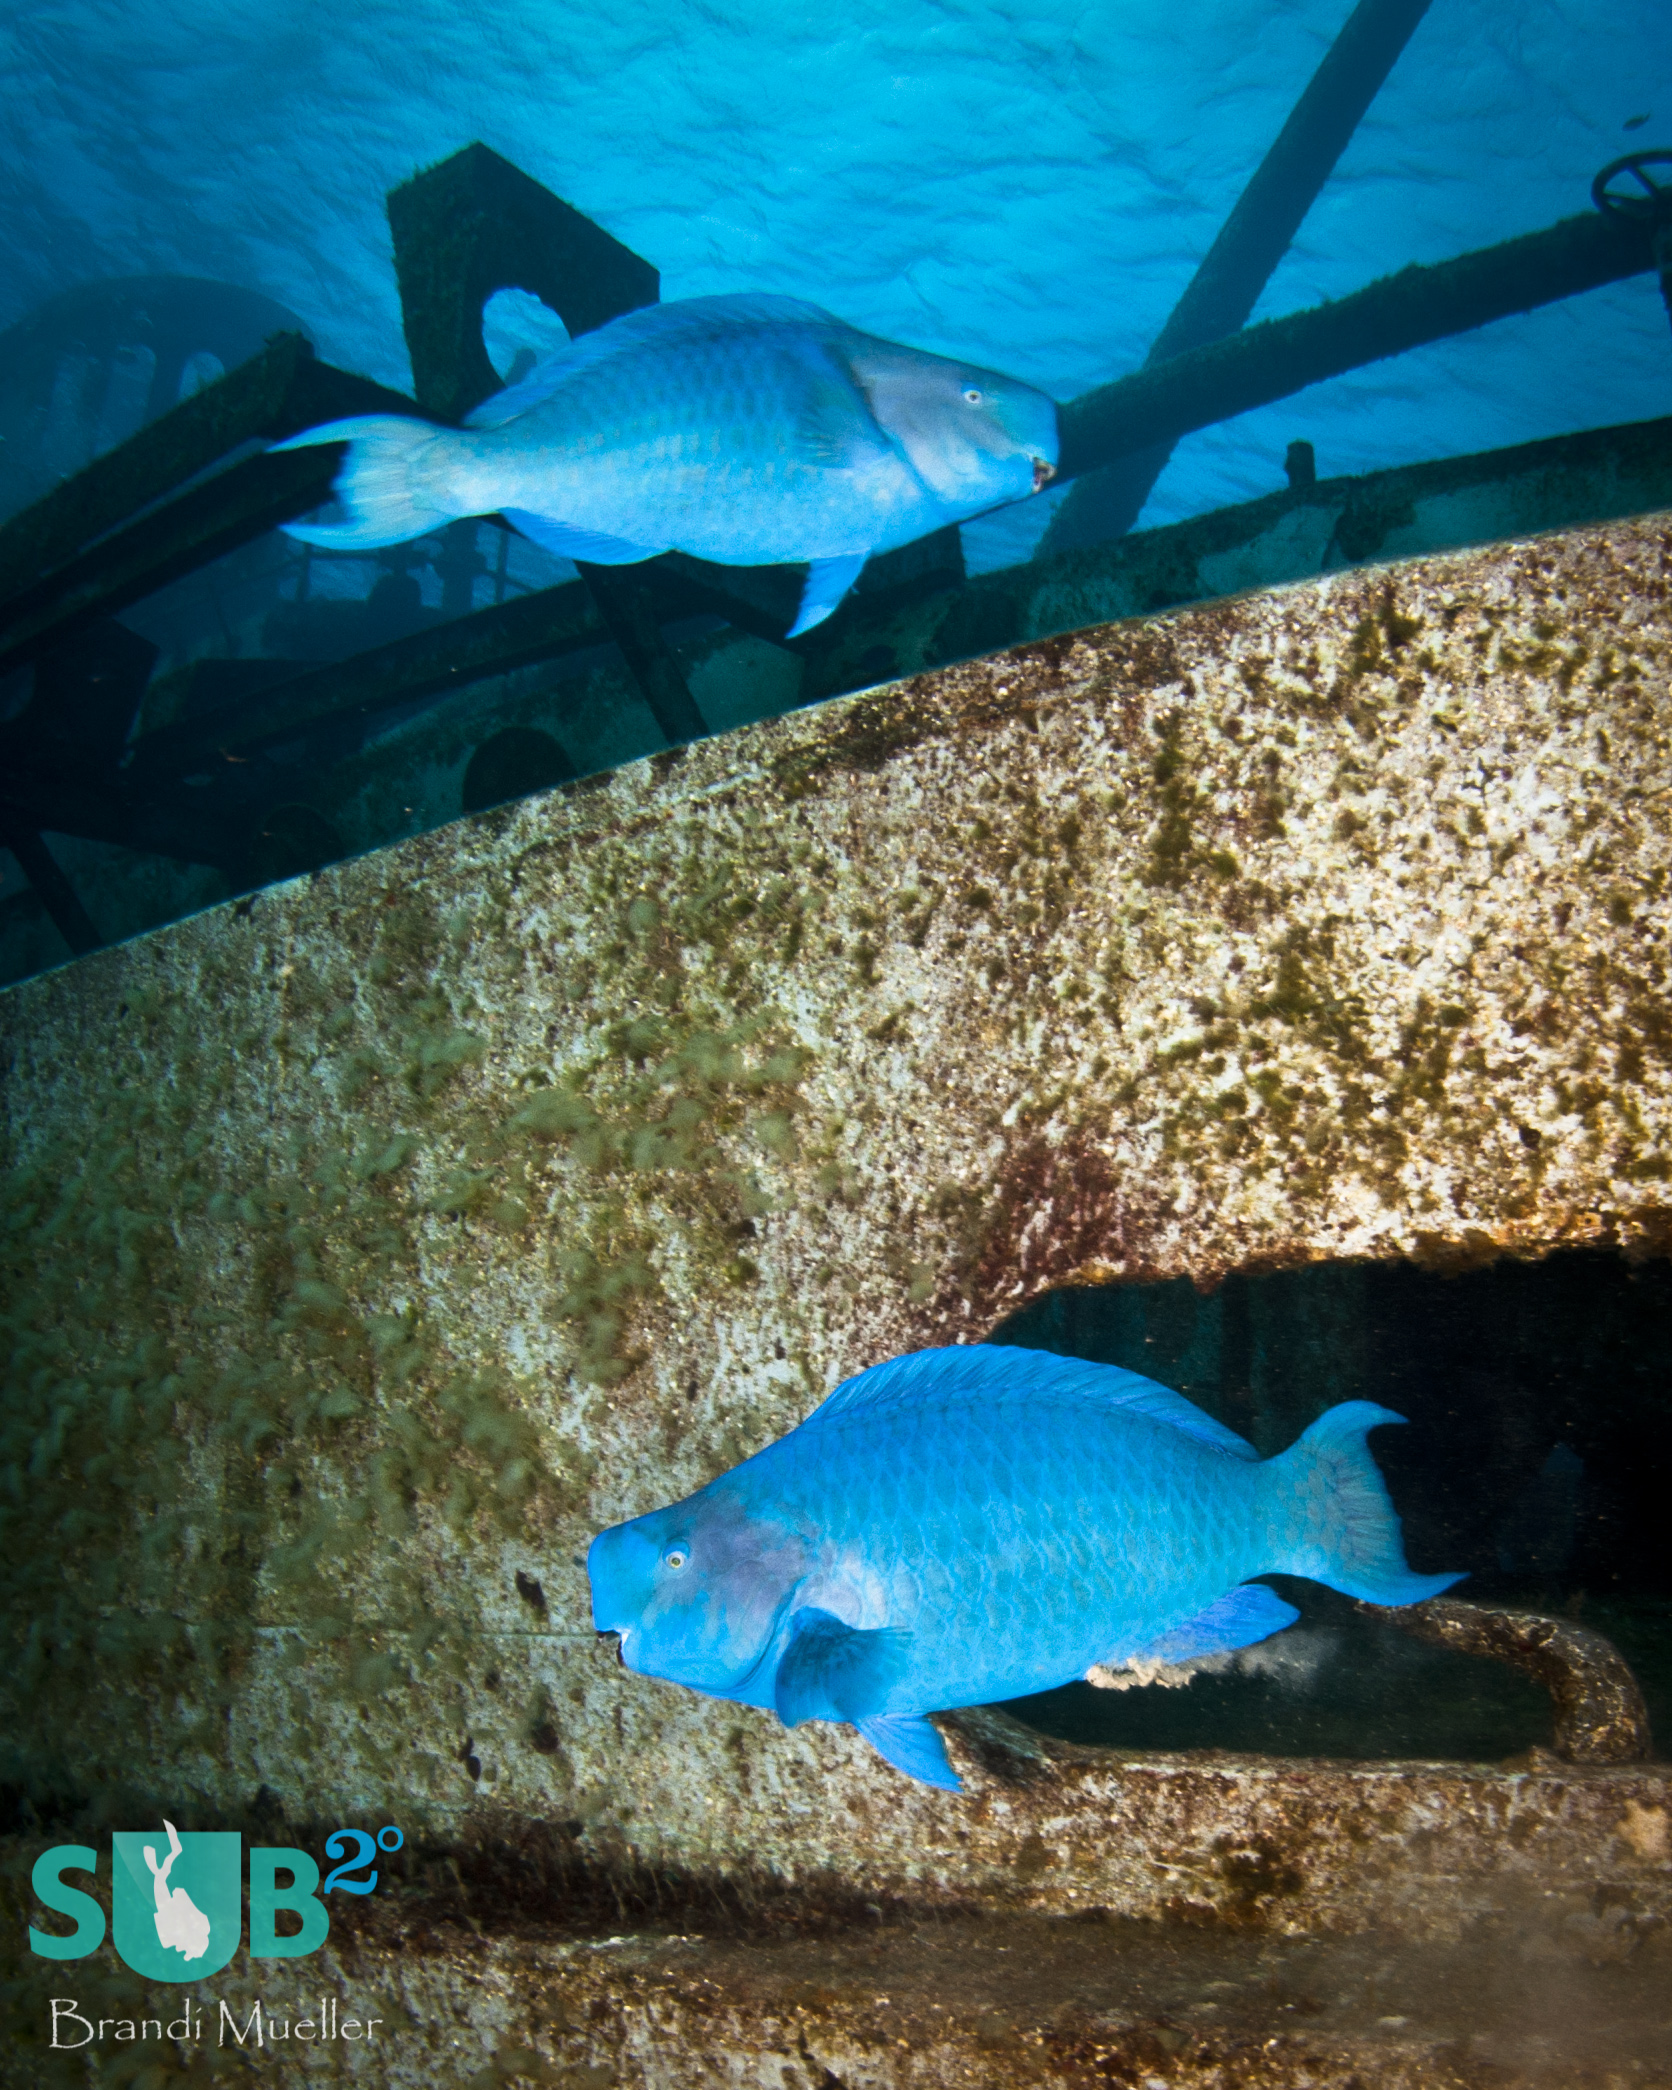 Two bright blue parrotfish cruise the deck of the USS Kittiwake, an artifically sunk wreck in the Cayman Islands.